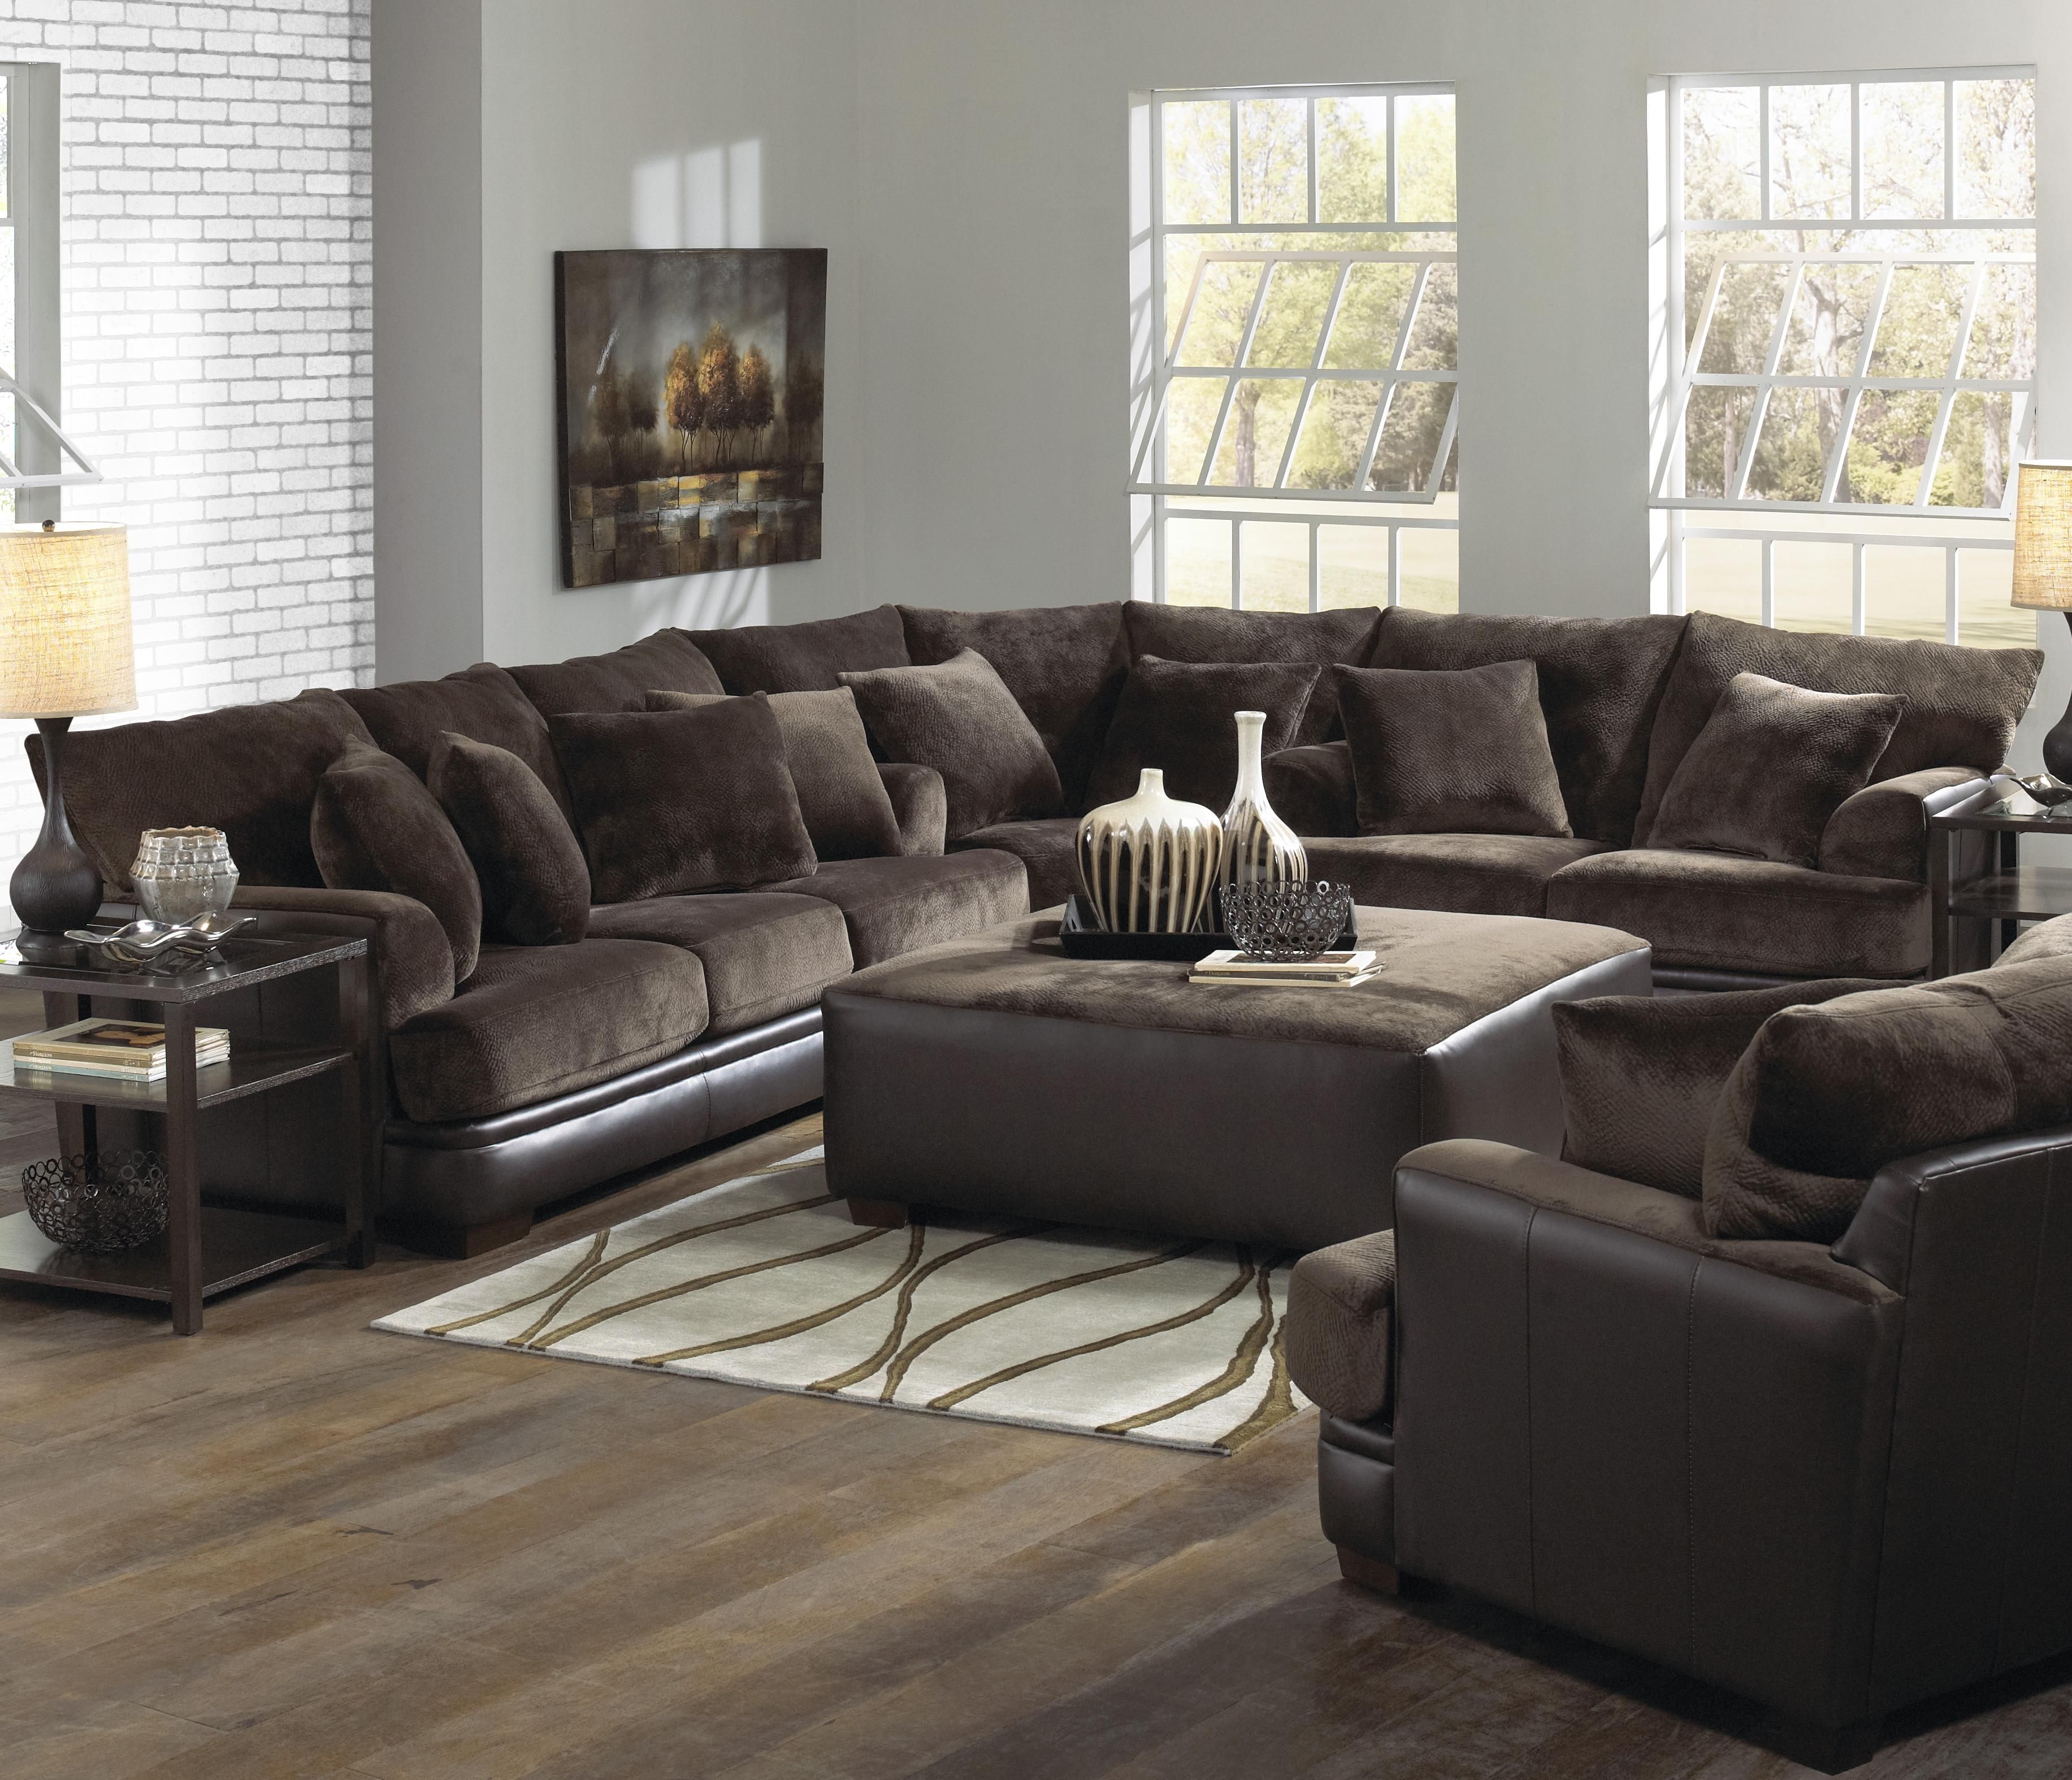 Sofas Center High Quality Sectional Sofas Cleanupflorida Com With Regard To Abbyson Living Charlotte Dark Brown Sectional Sofa And Ottoman (View 2 of 15)